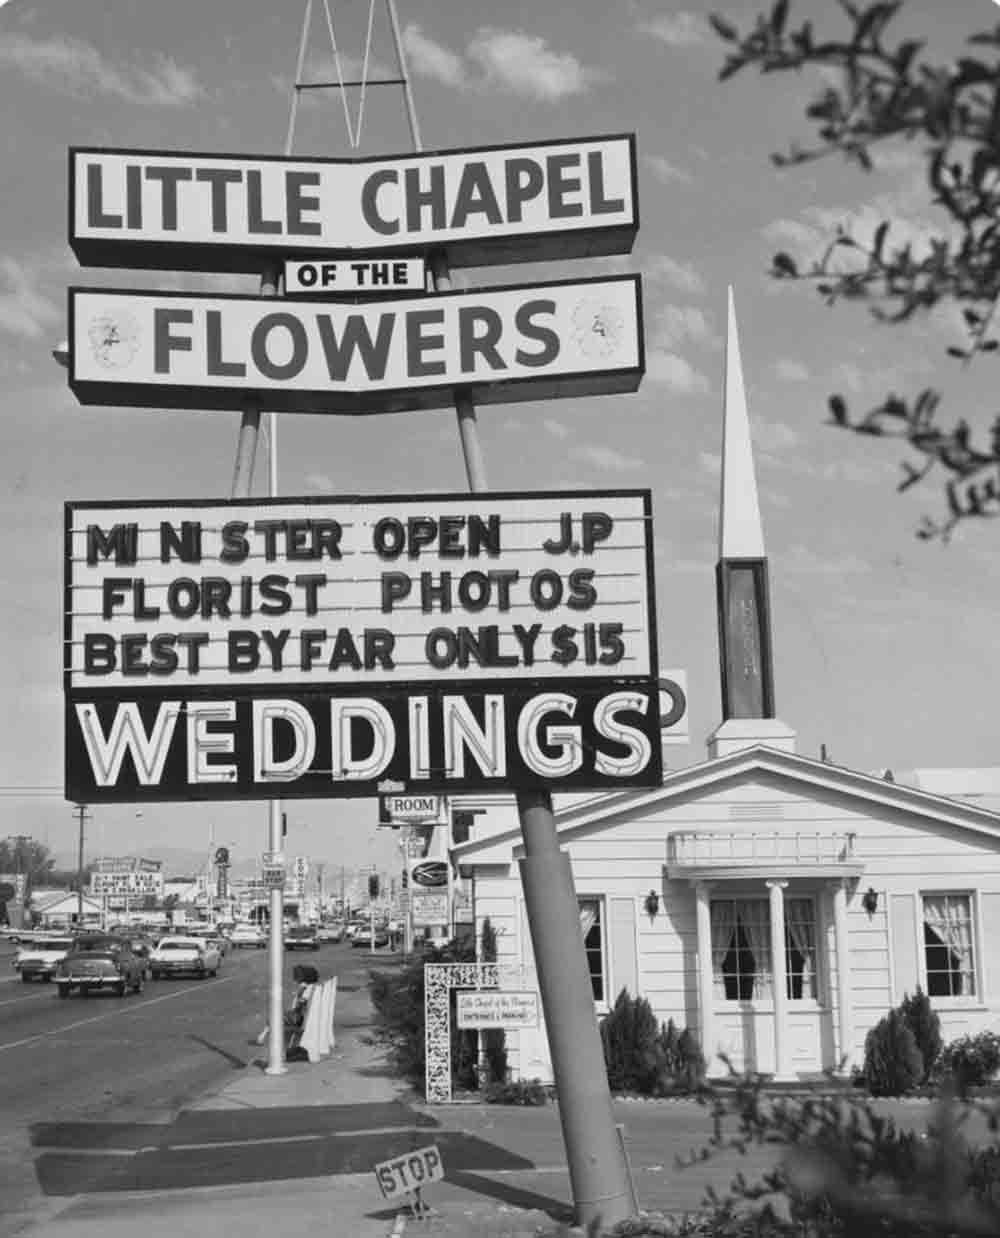 Chapel of the Flowers Unveils Vintage Vegas Package to Celebrate 70th Anniversary of Las Vegas as ”Wedding Capital of the World”